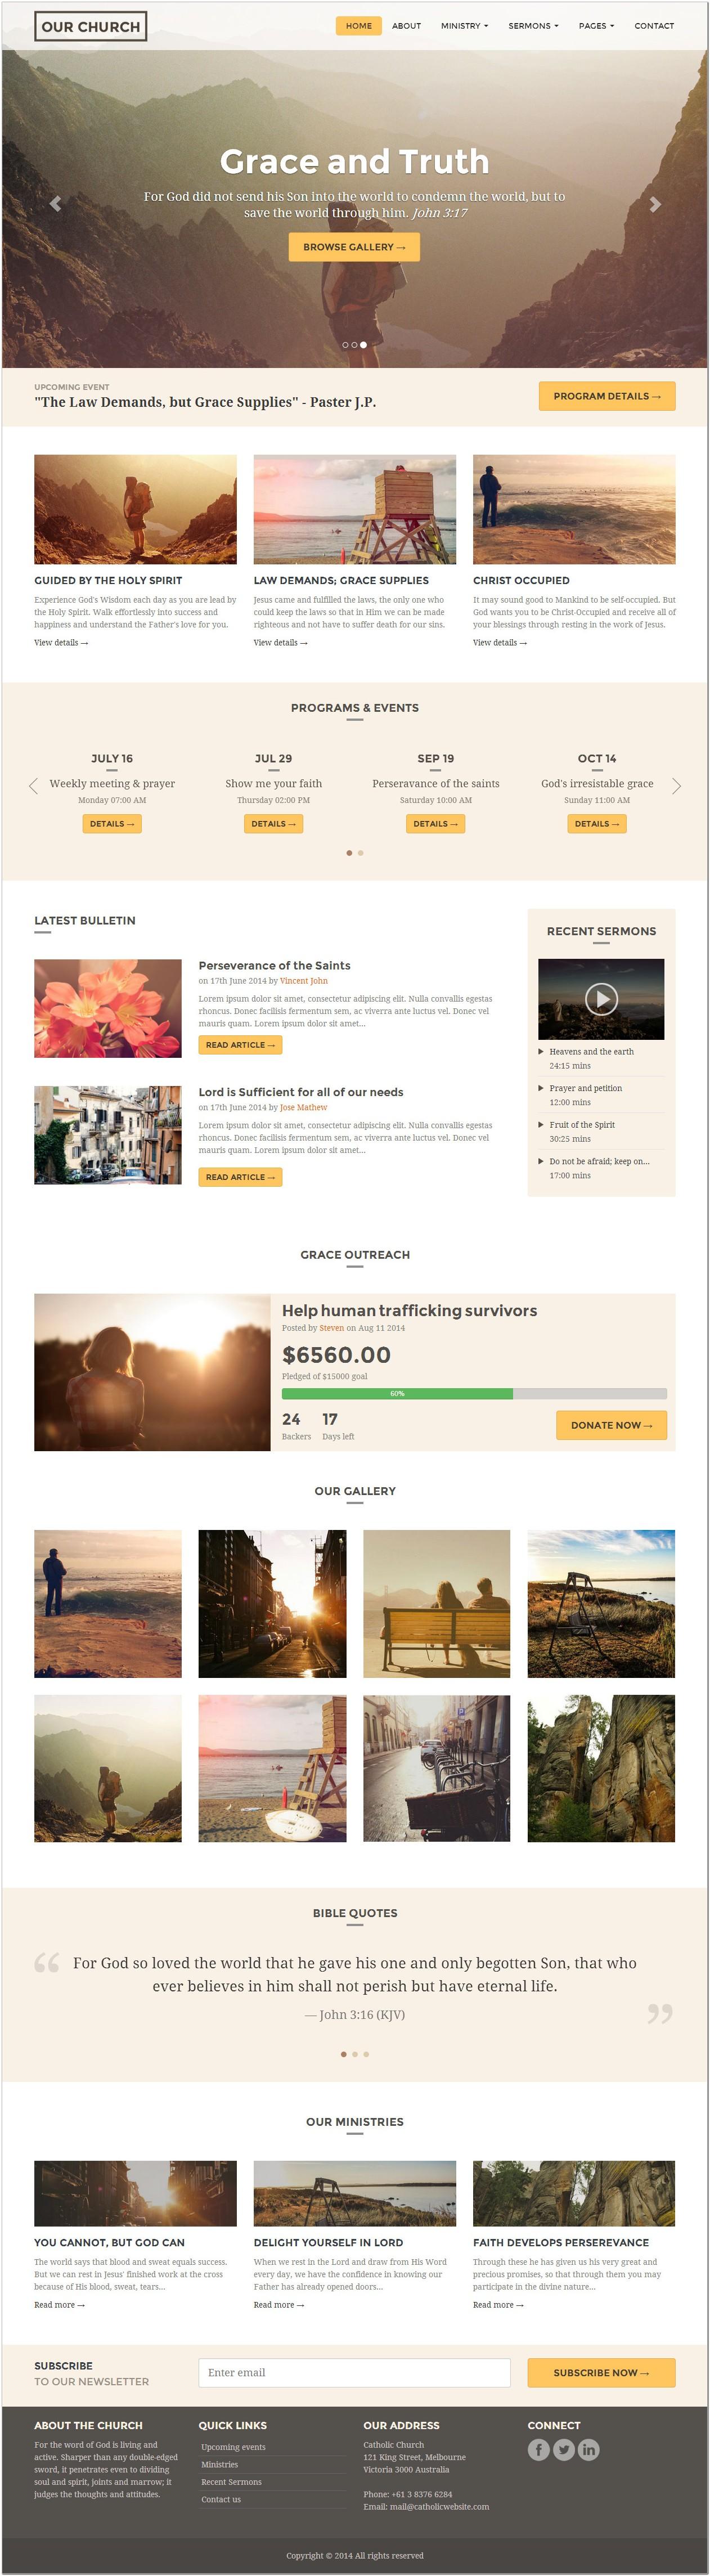 Best Bootstrap Templates 2014